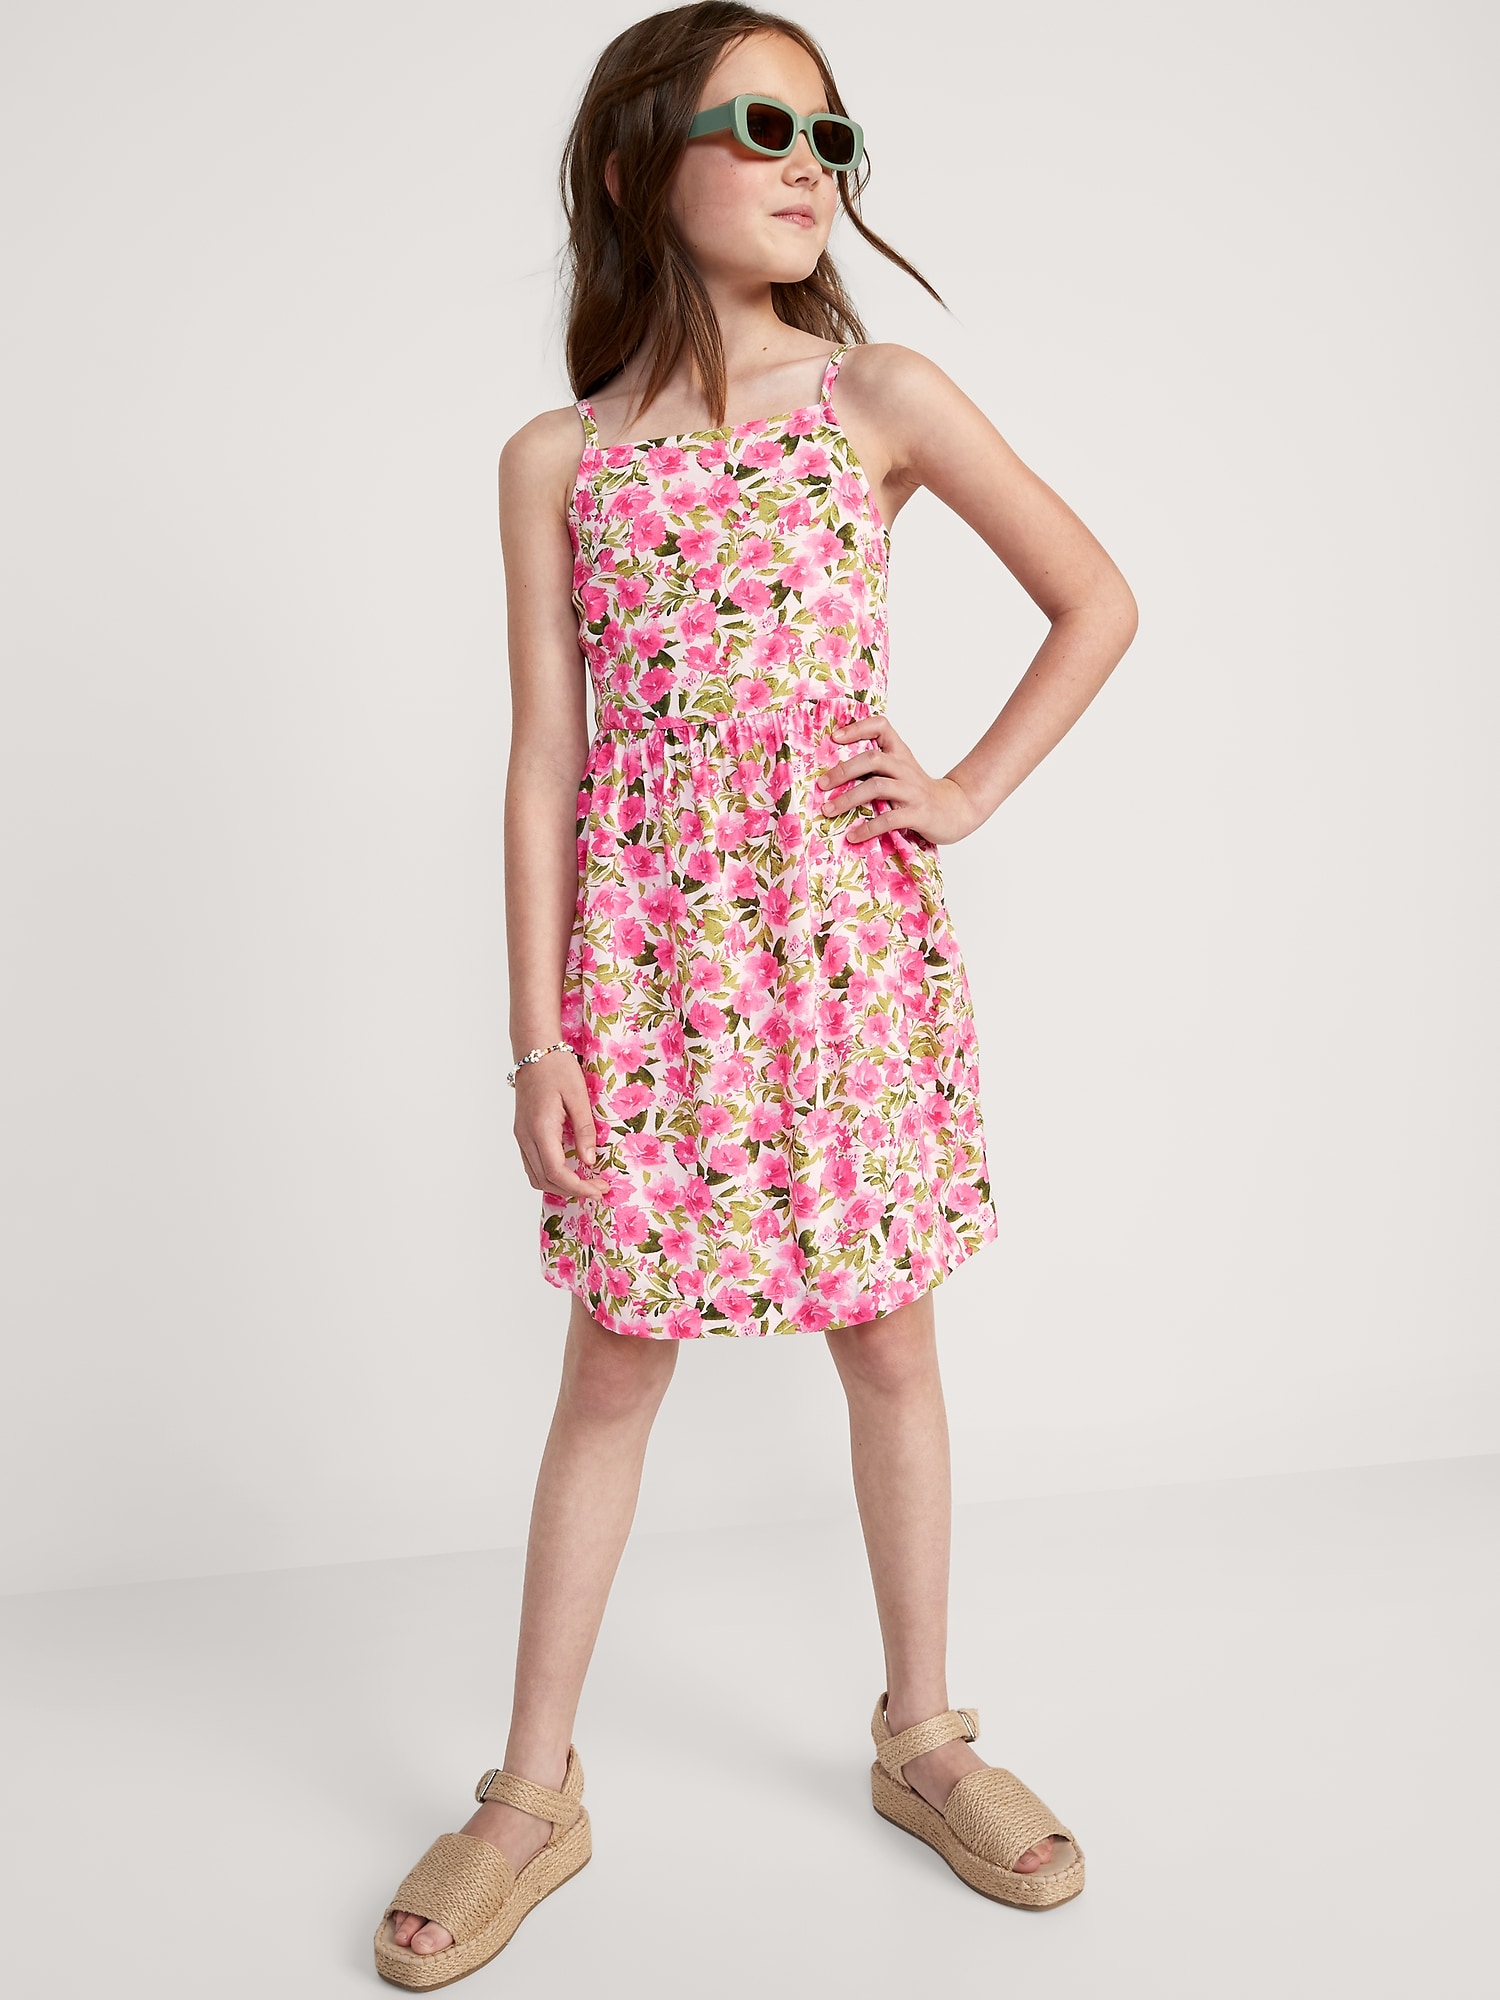 Old Navy Printed Fit & Flare Cami Dress for Girls pink. 1